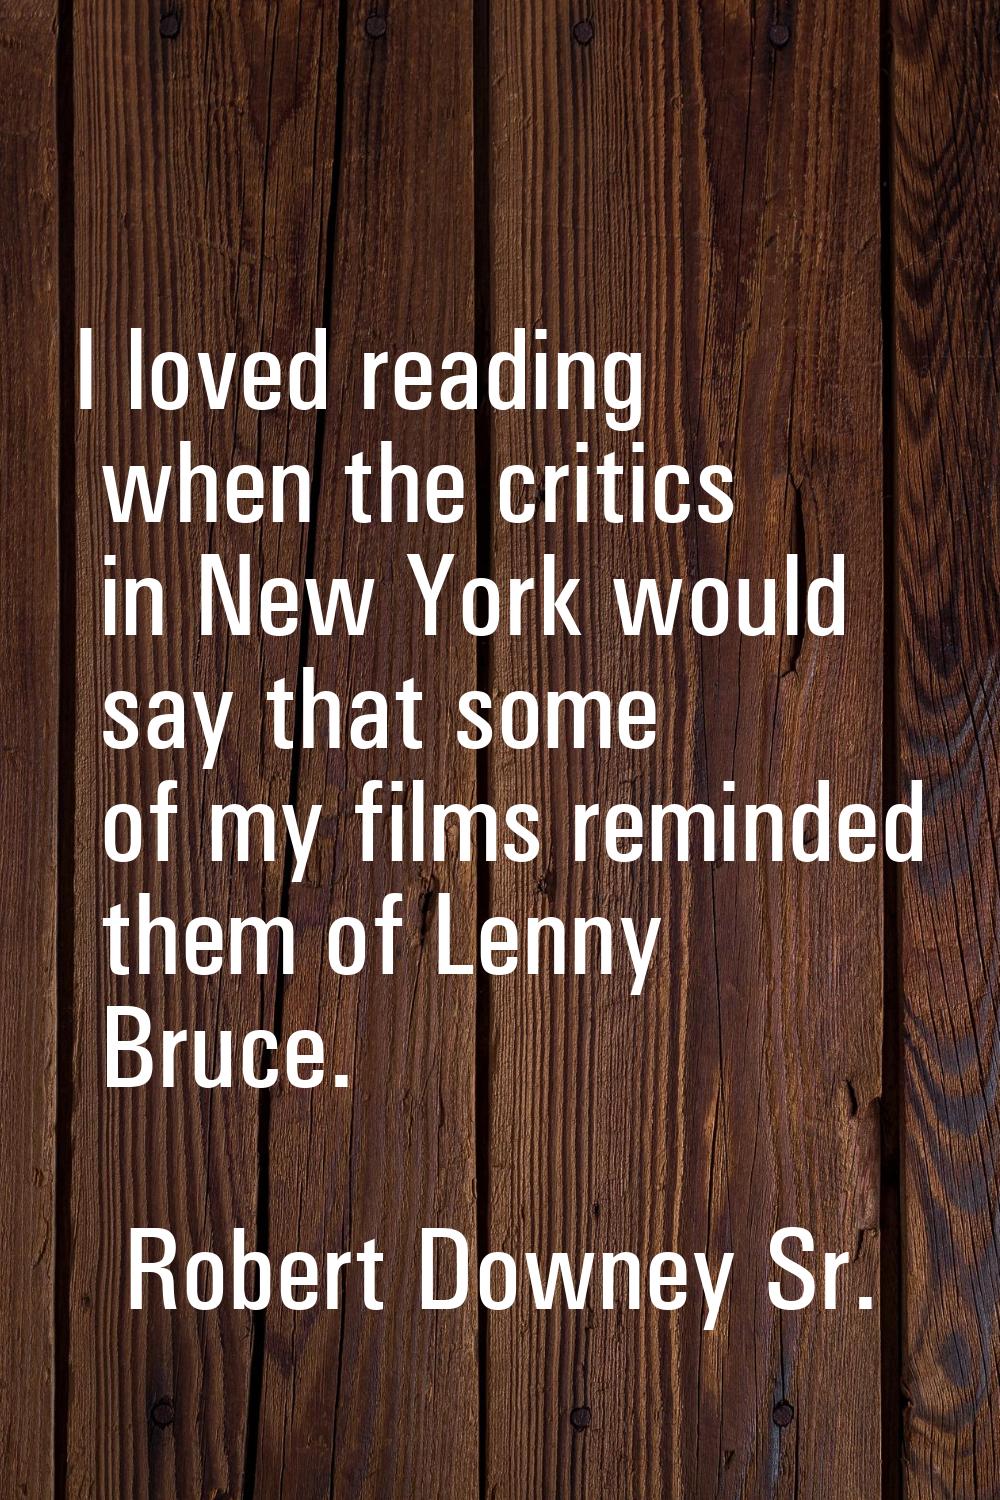 I loved reading when the critics in New York would say that some of my films reminded them of Lenny